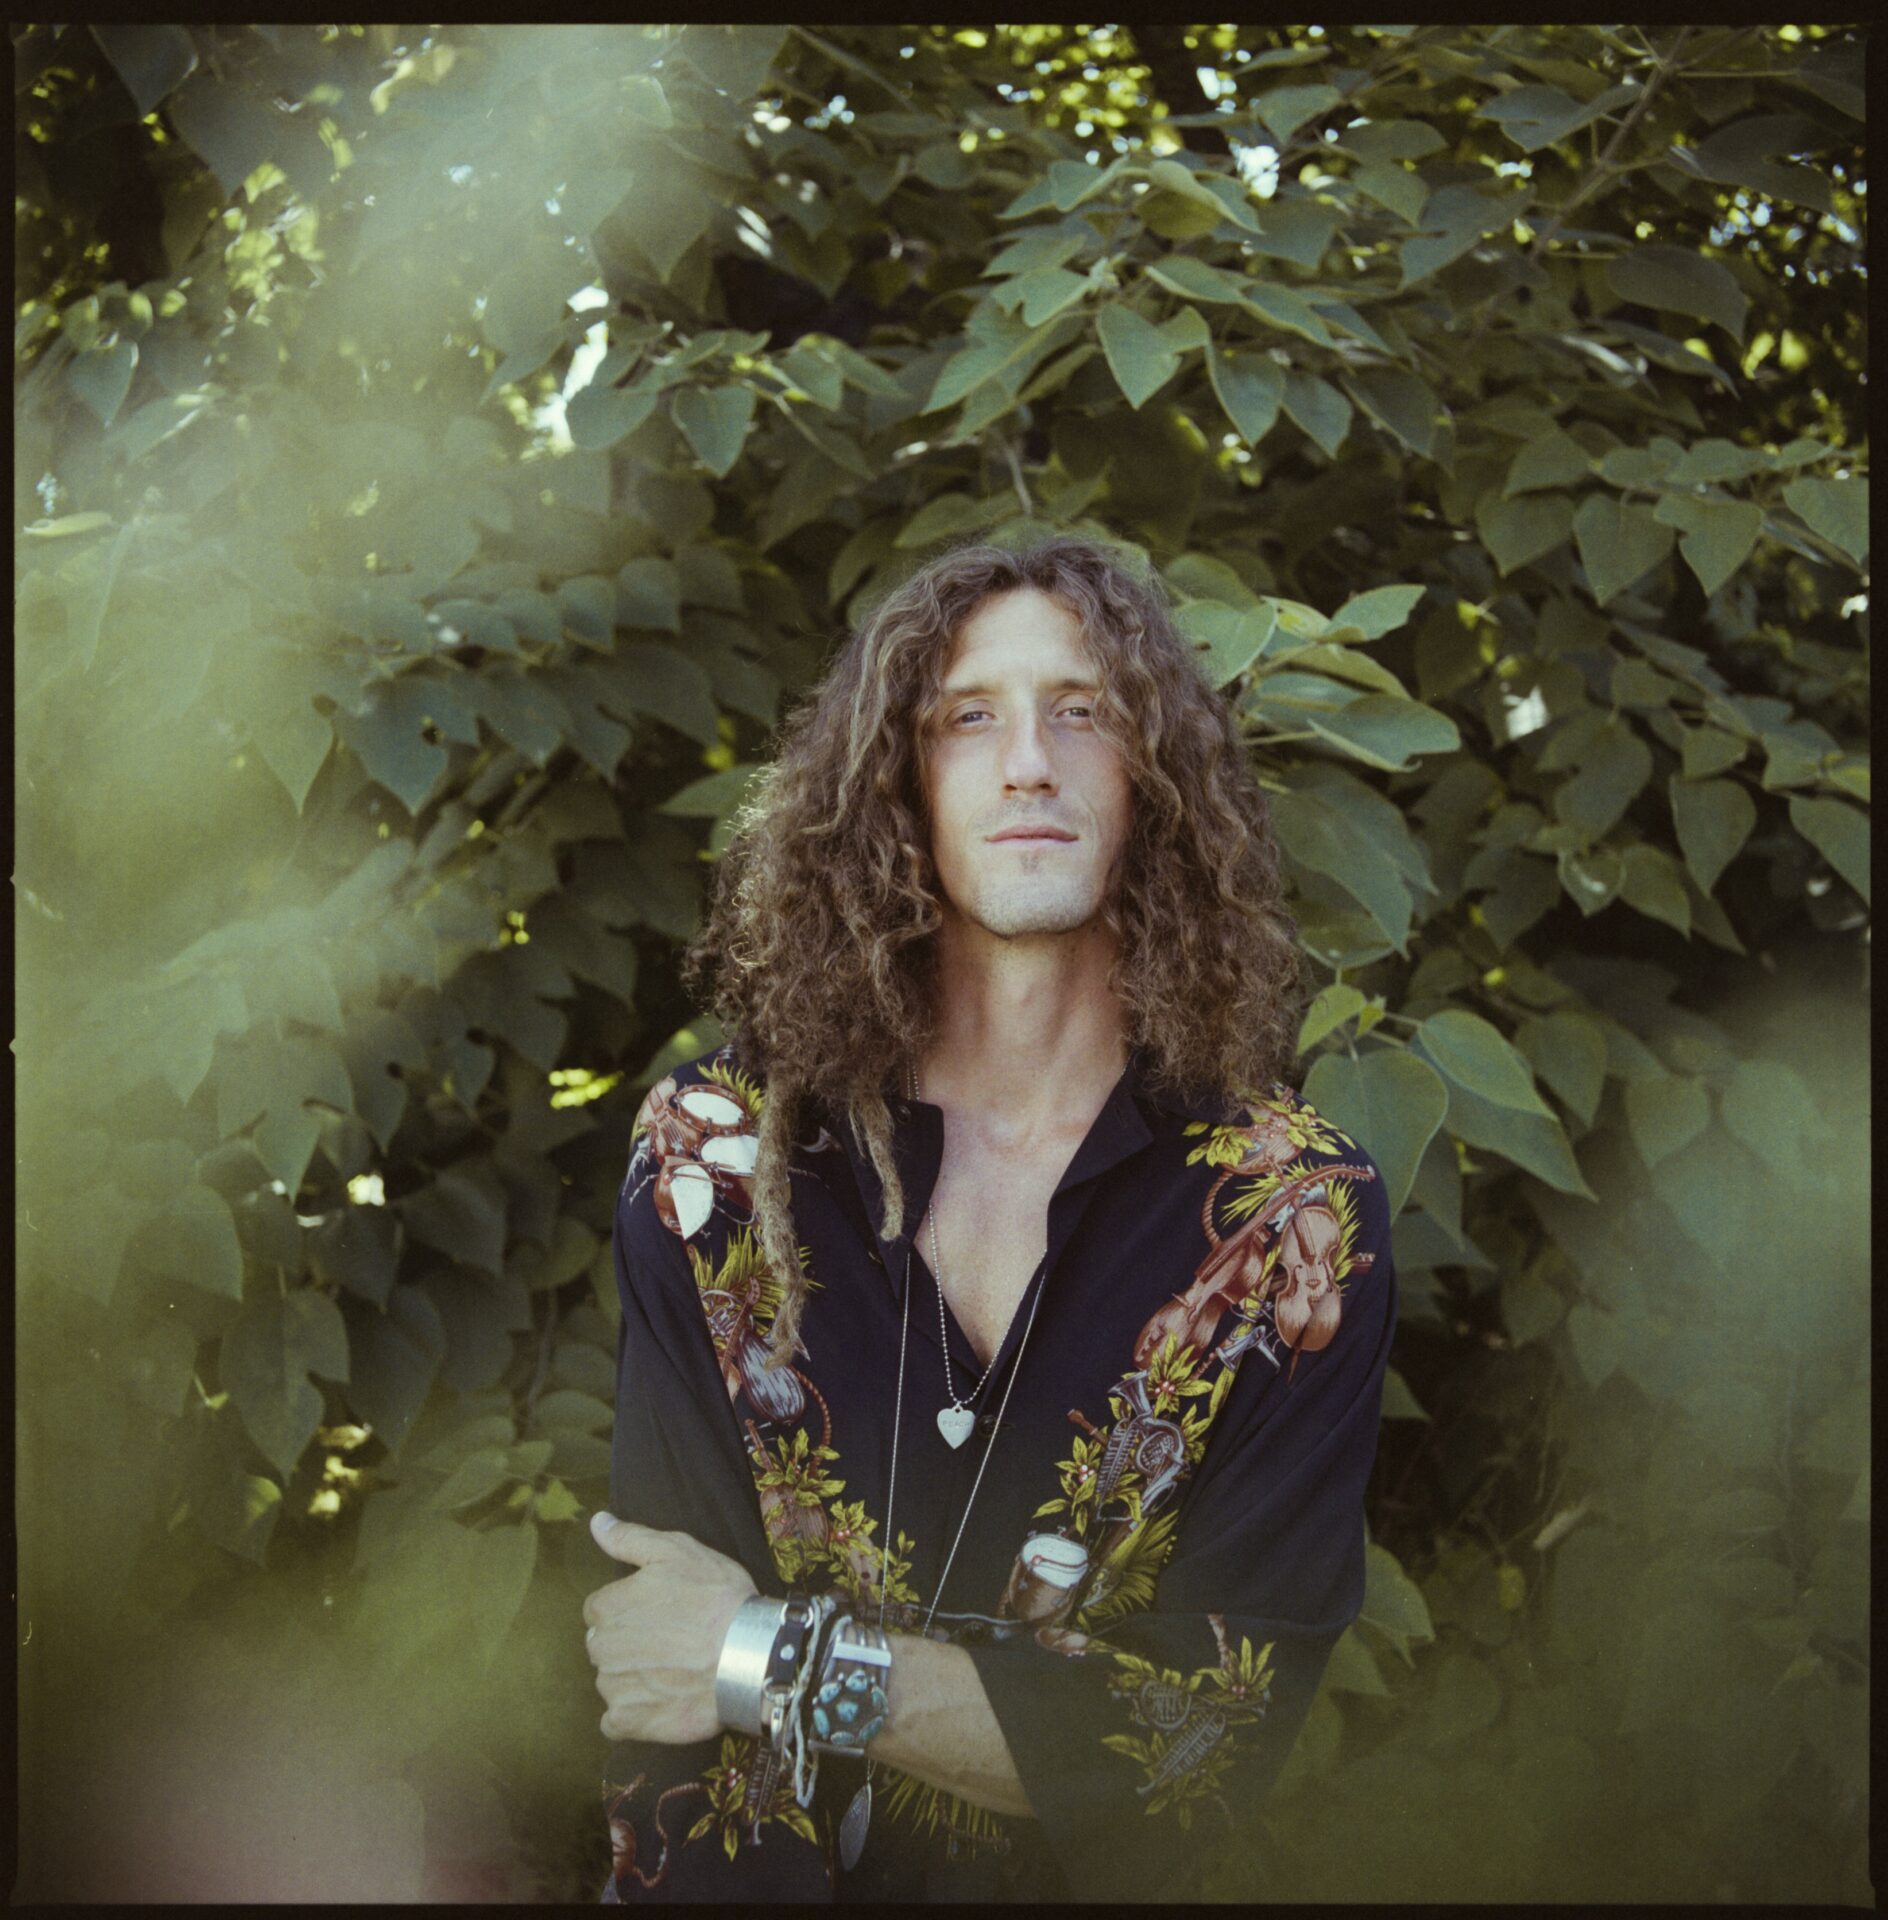 David Shaw (The Revivalists) releases first ever solo singles, “Shaken” + “Promised Land”